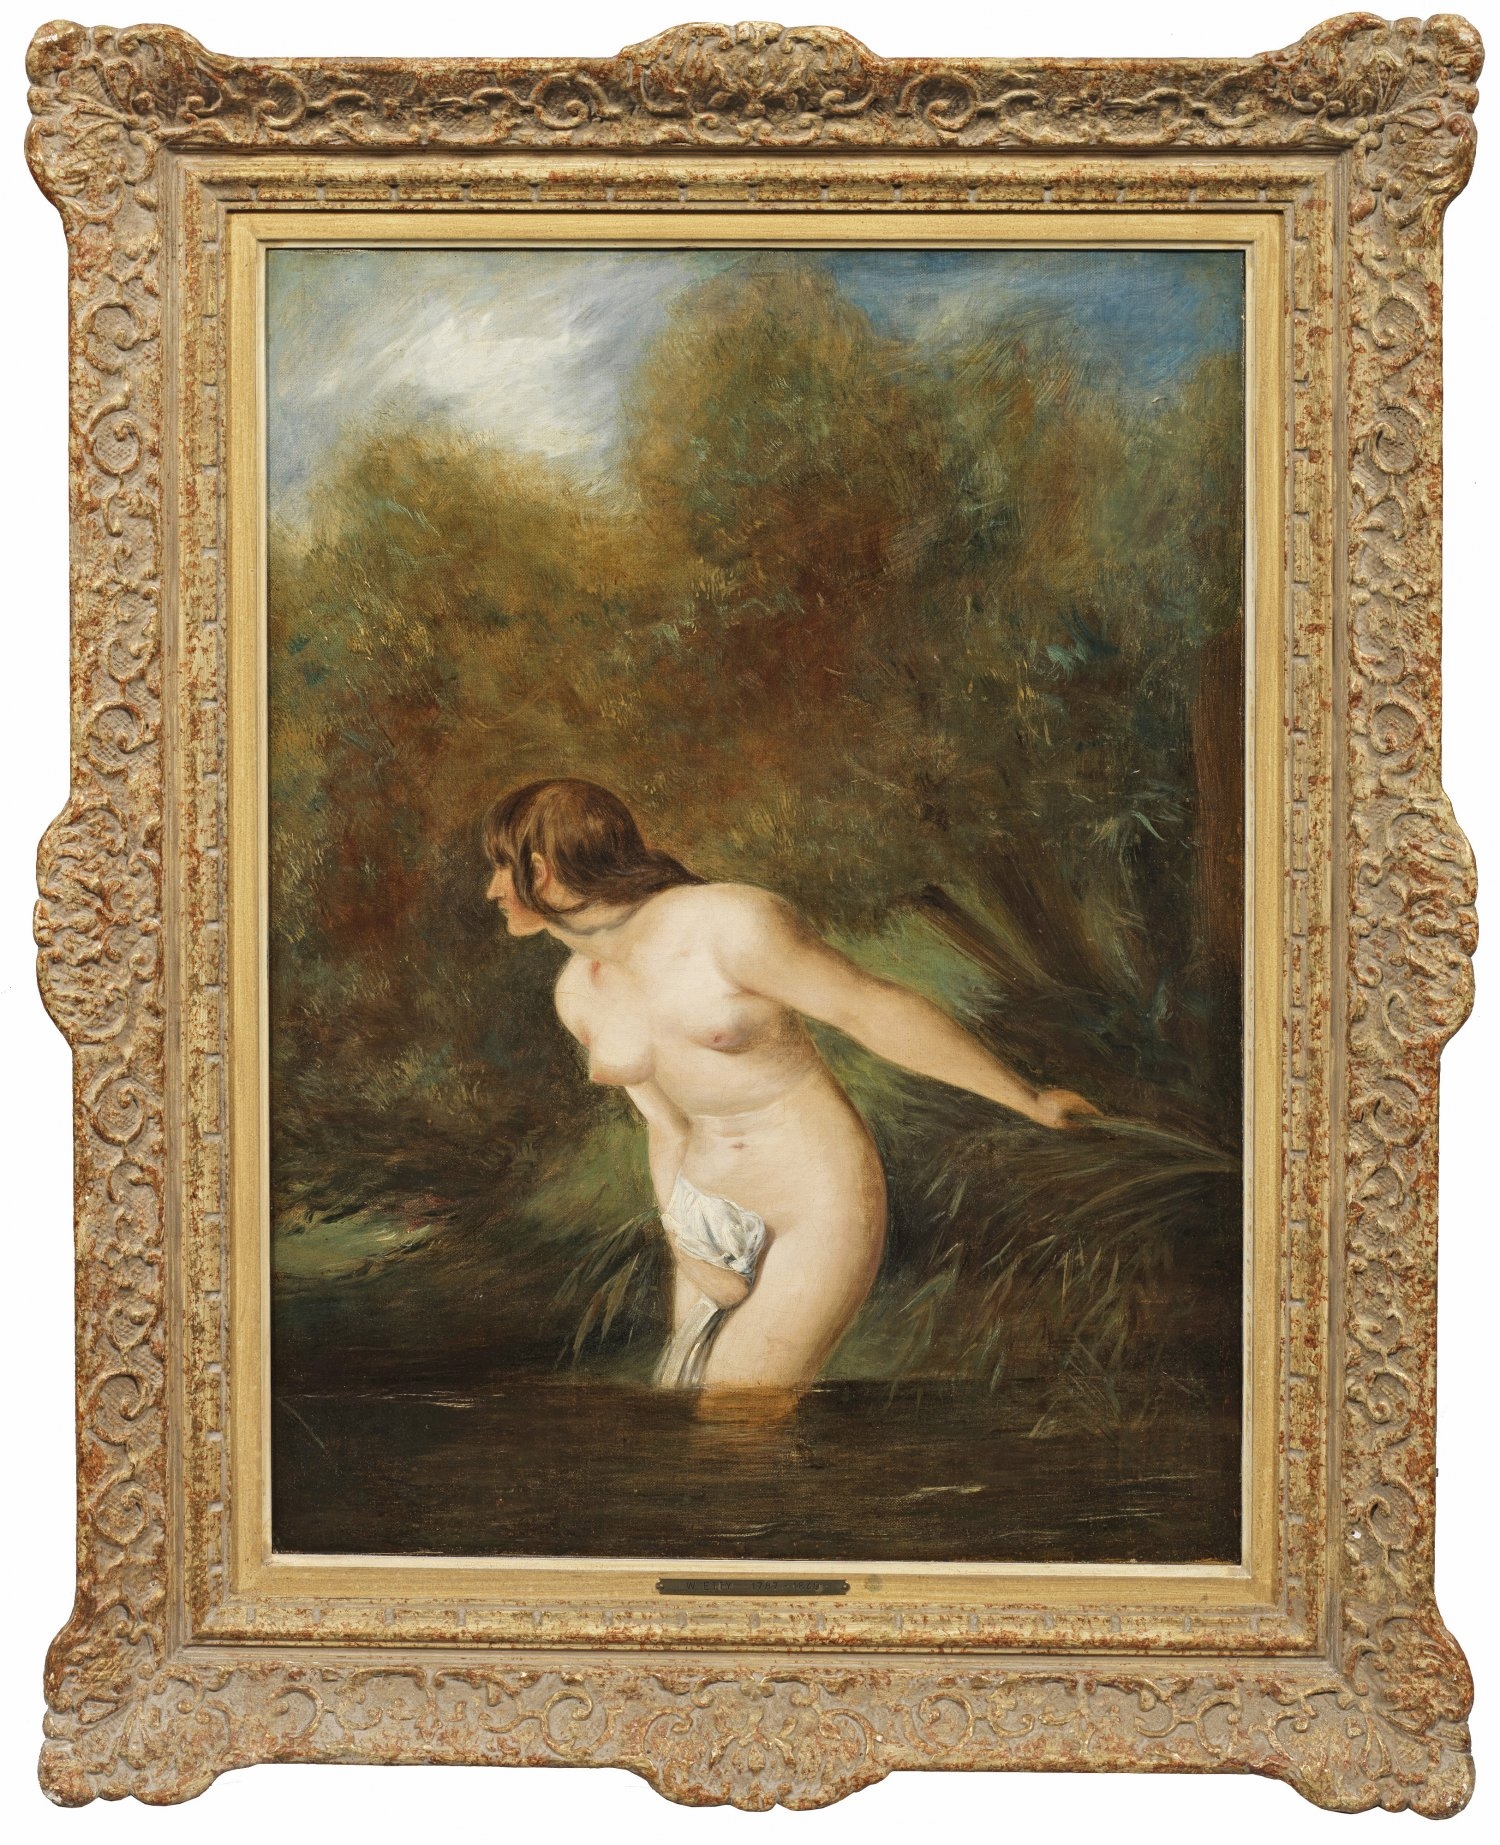 "Musidora: The Bather 'At the Doubtful Breeze Alarmed' oder auch "The Bather" by William Etty